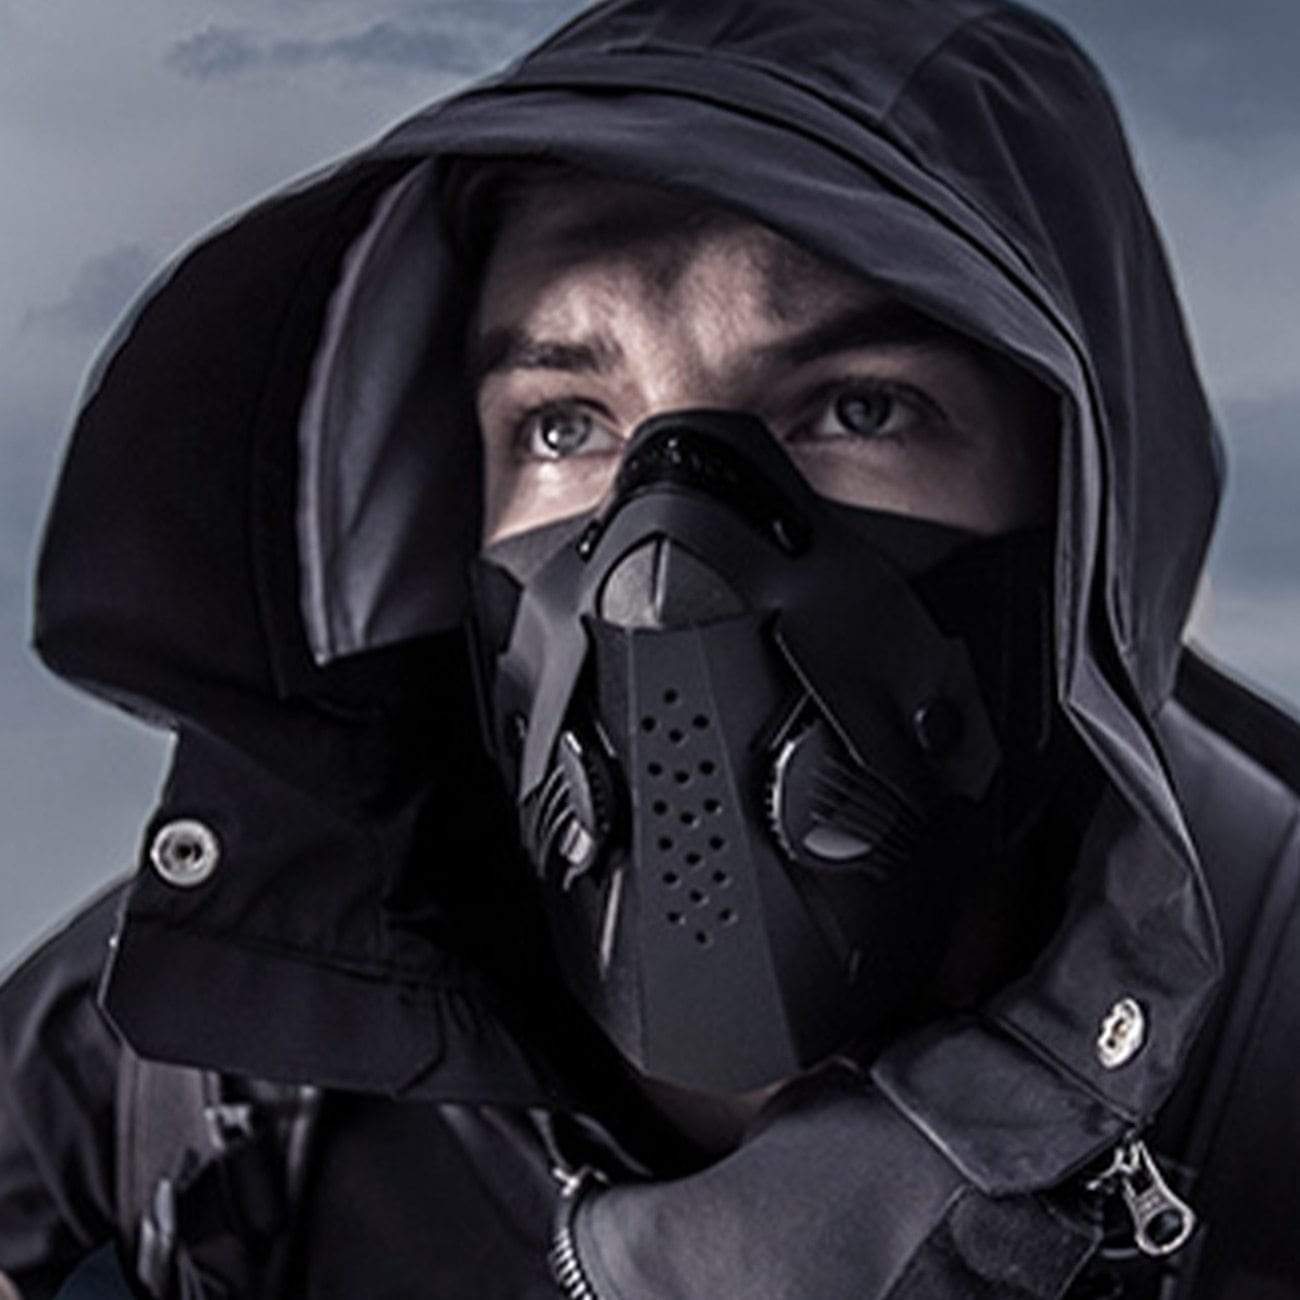 Kinky Cloth 32703 Tactical Breathable Front Panel Face Mask